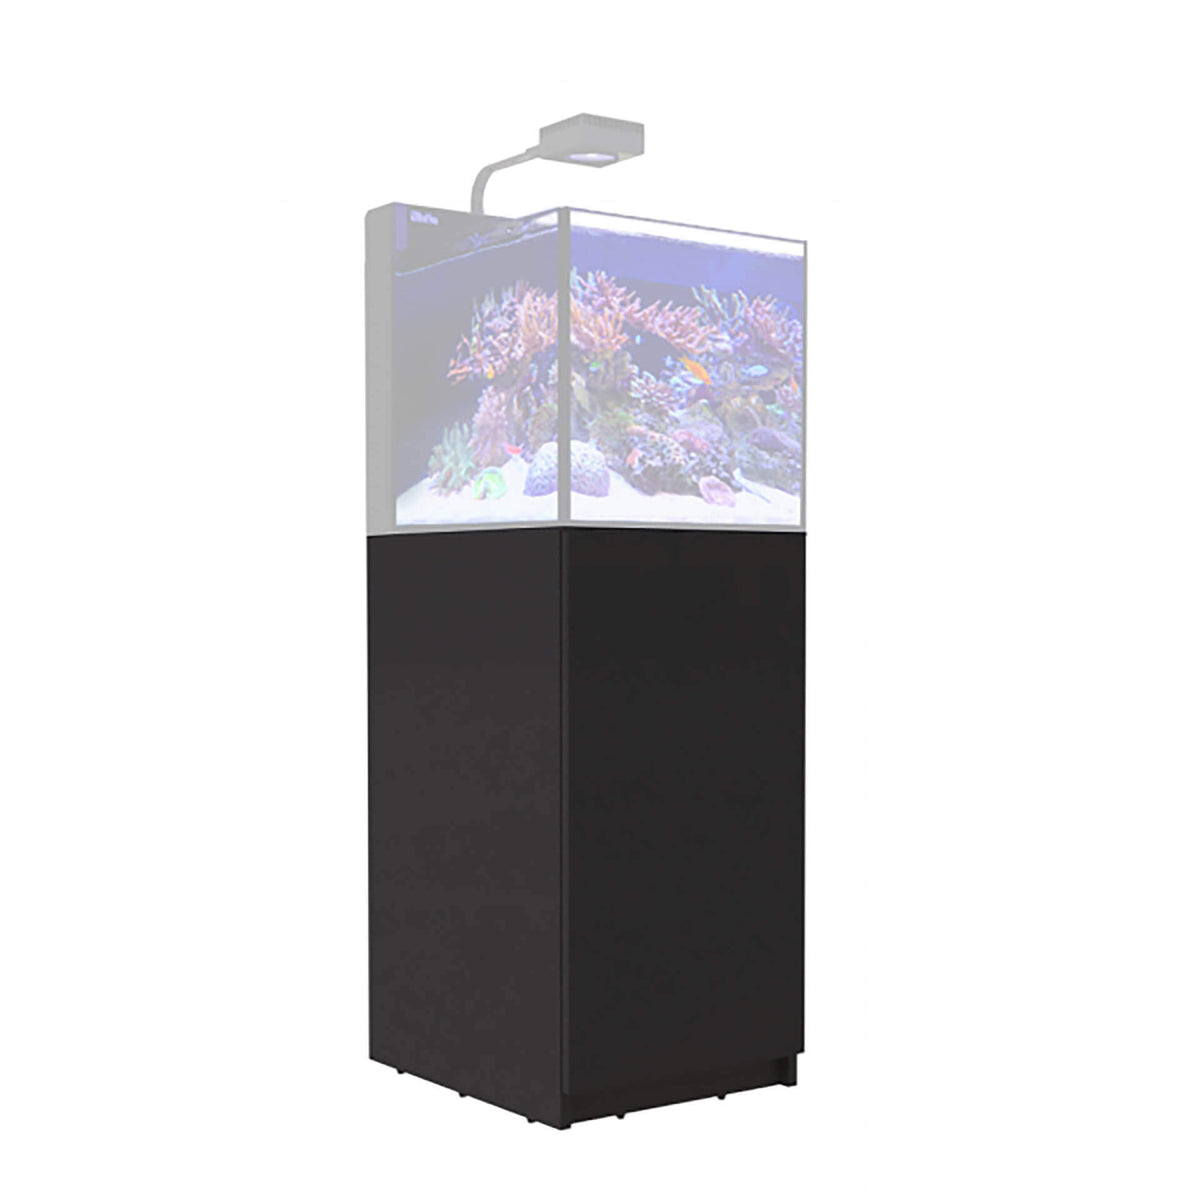 Red Sea Max Nano Peninsula Cabinet - Black or White - In Store Pick Up Only